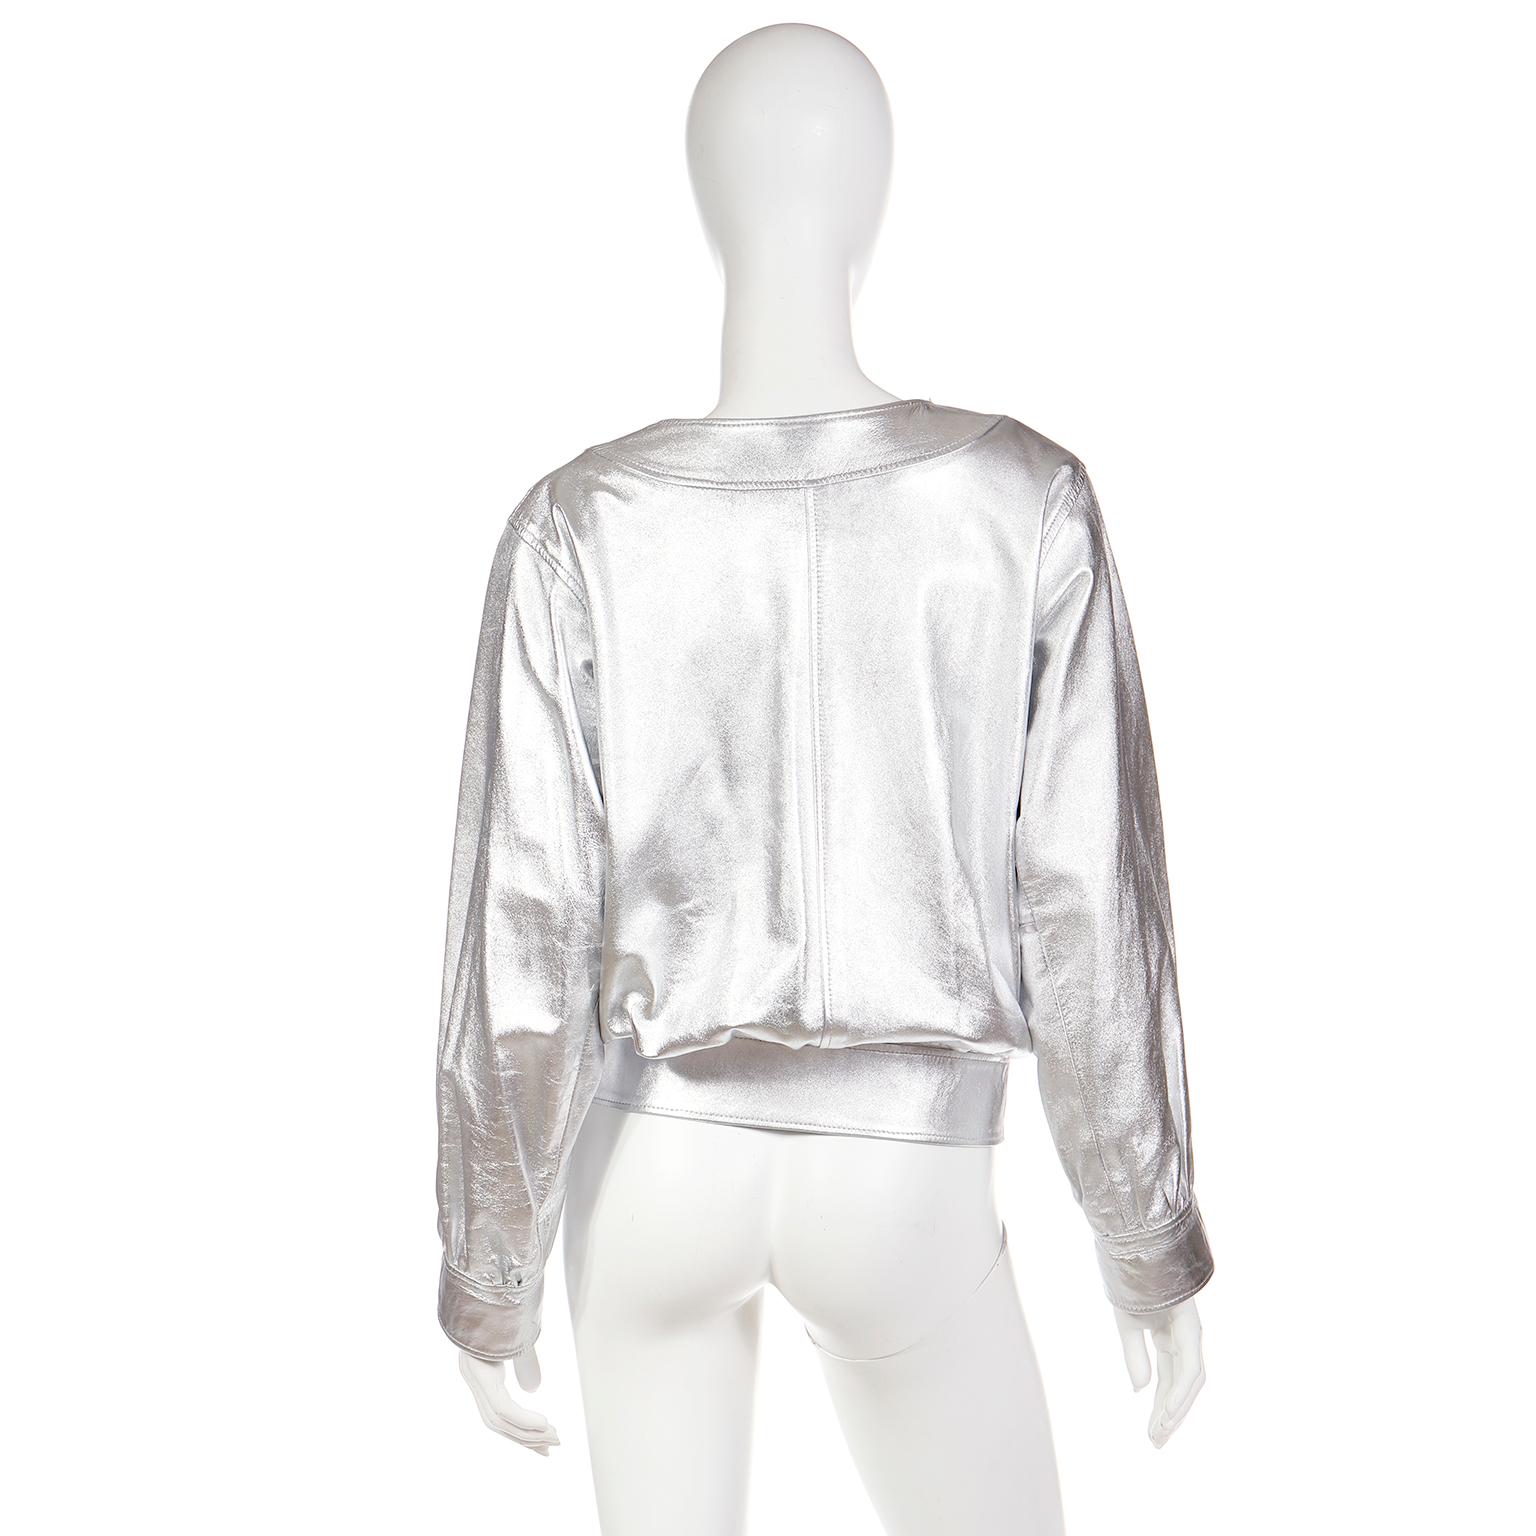 1982 Yves Saint Laurent Silver Leather Documented Runway Jacket For Sale 1